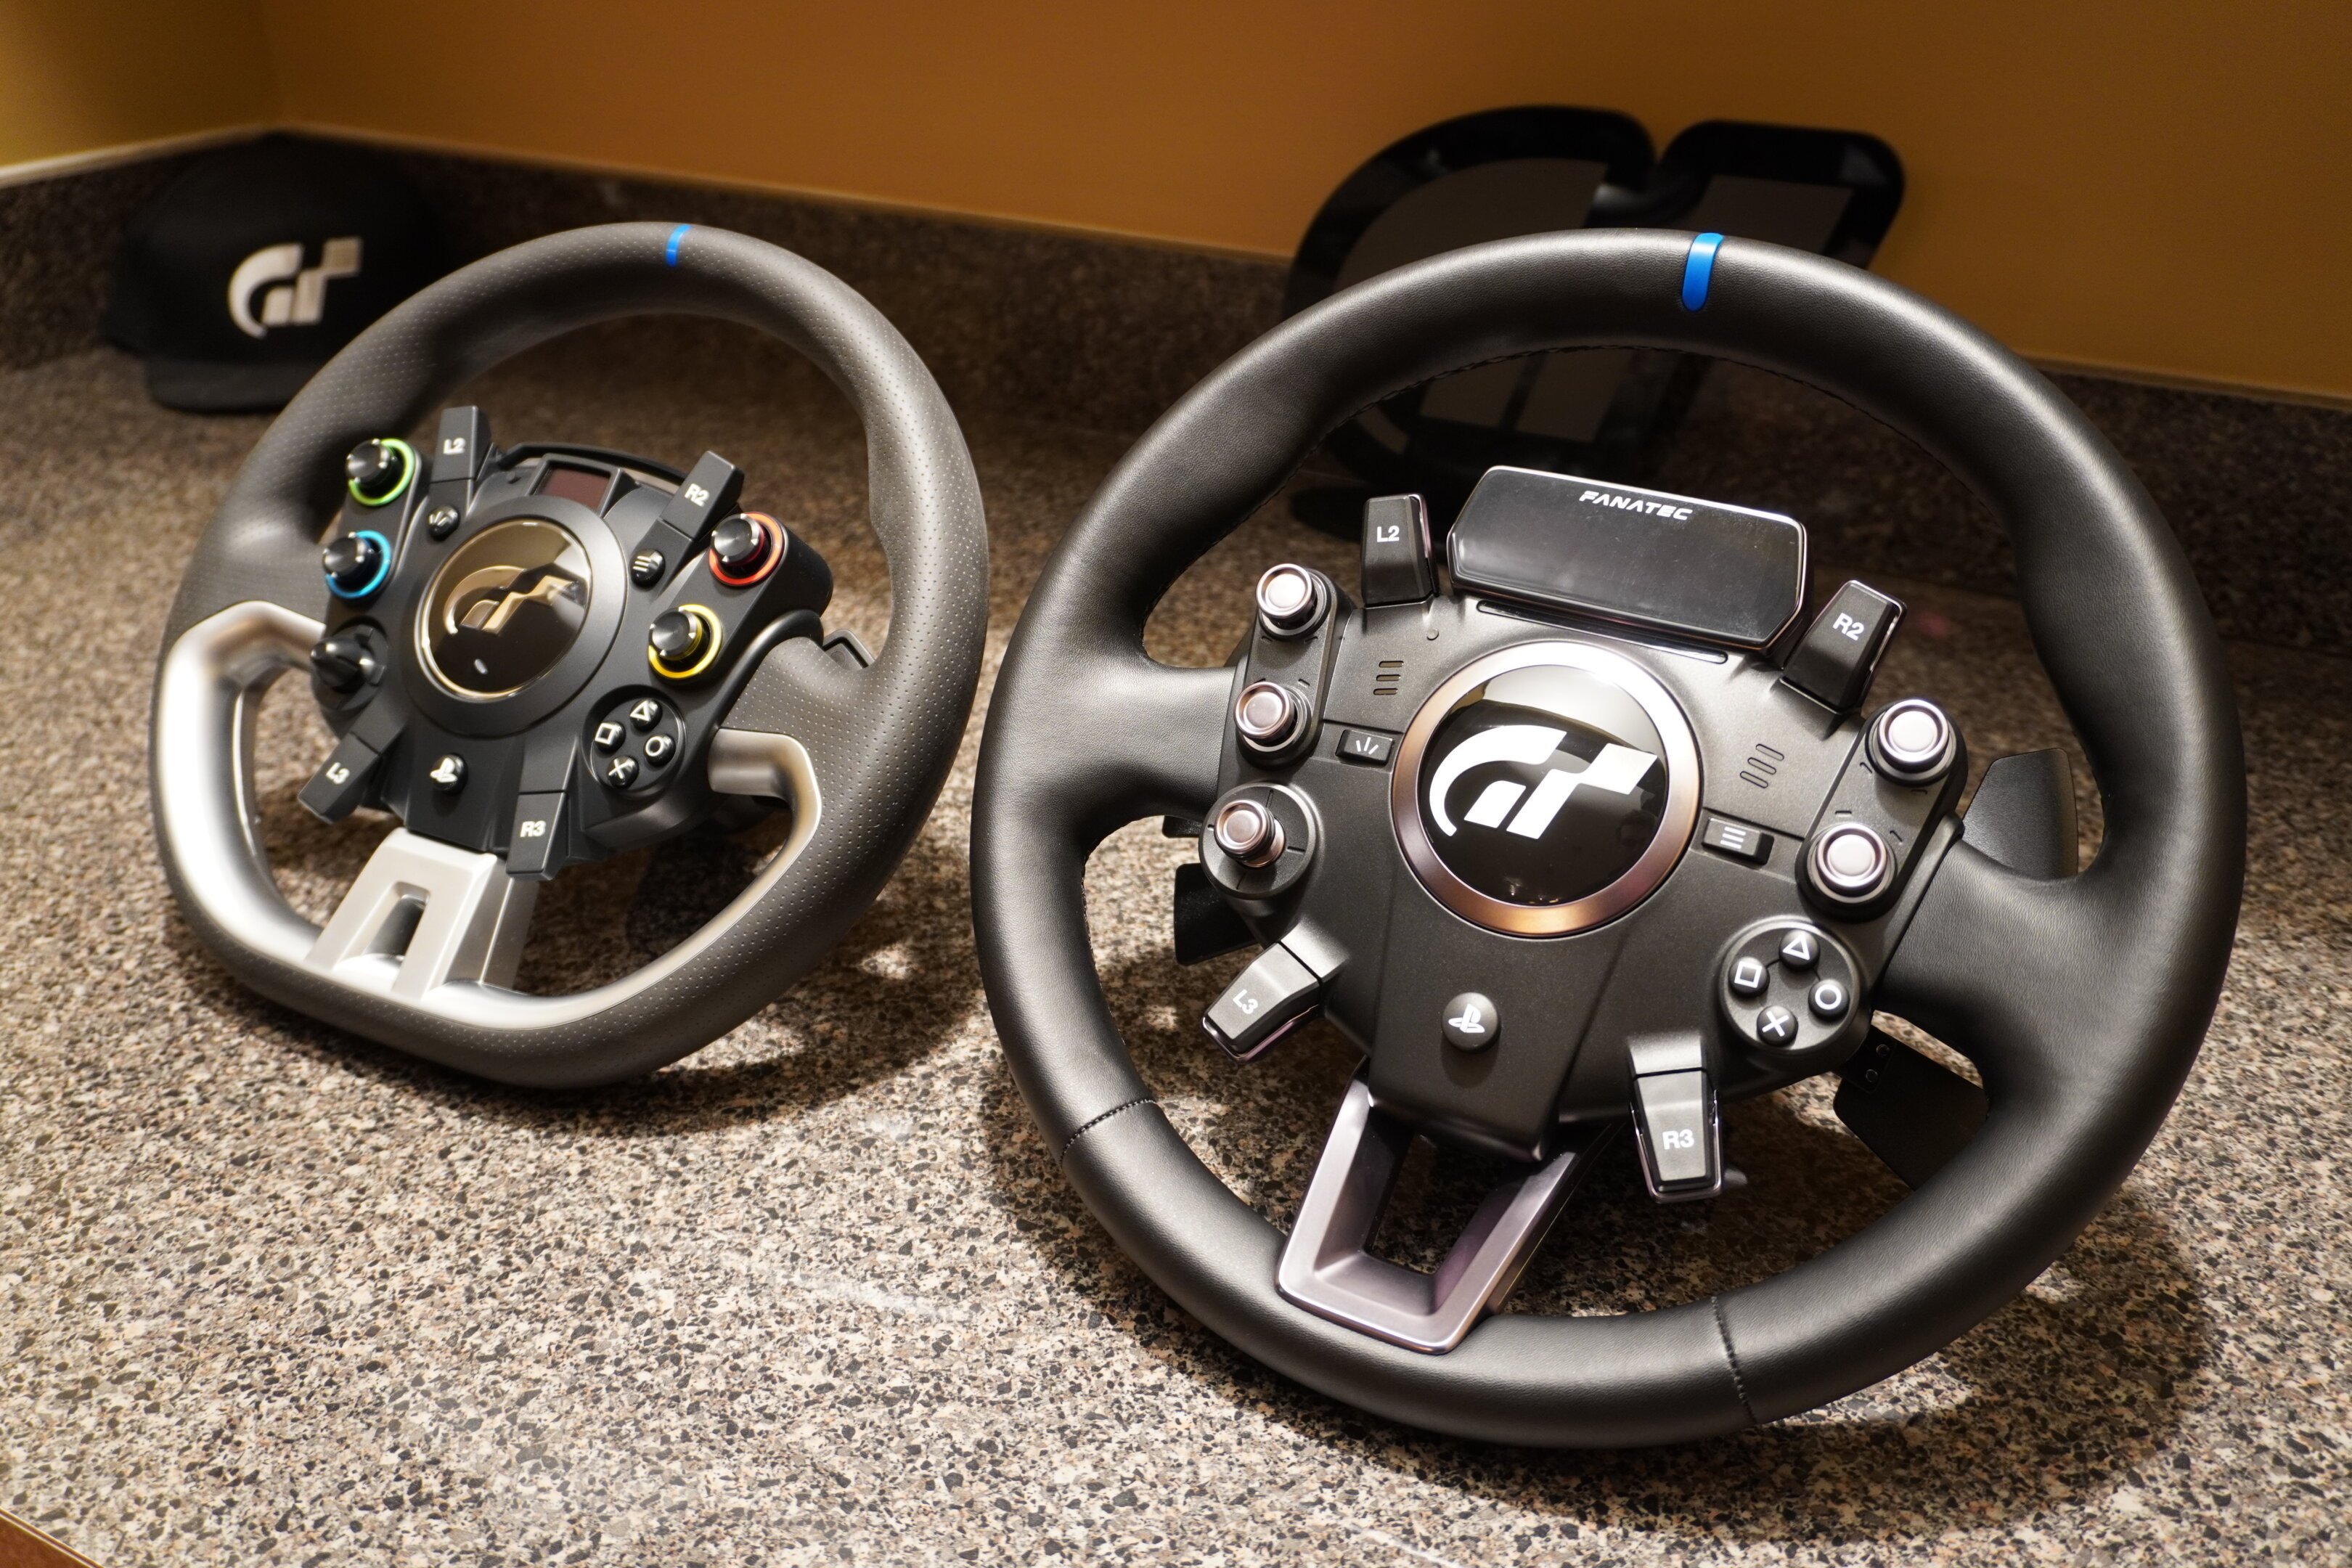 Fanatec Reveals All-New Gran Turismo DD Extreme Wheel: Full Review